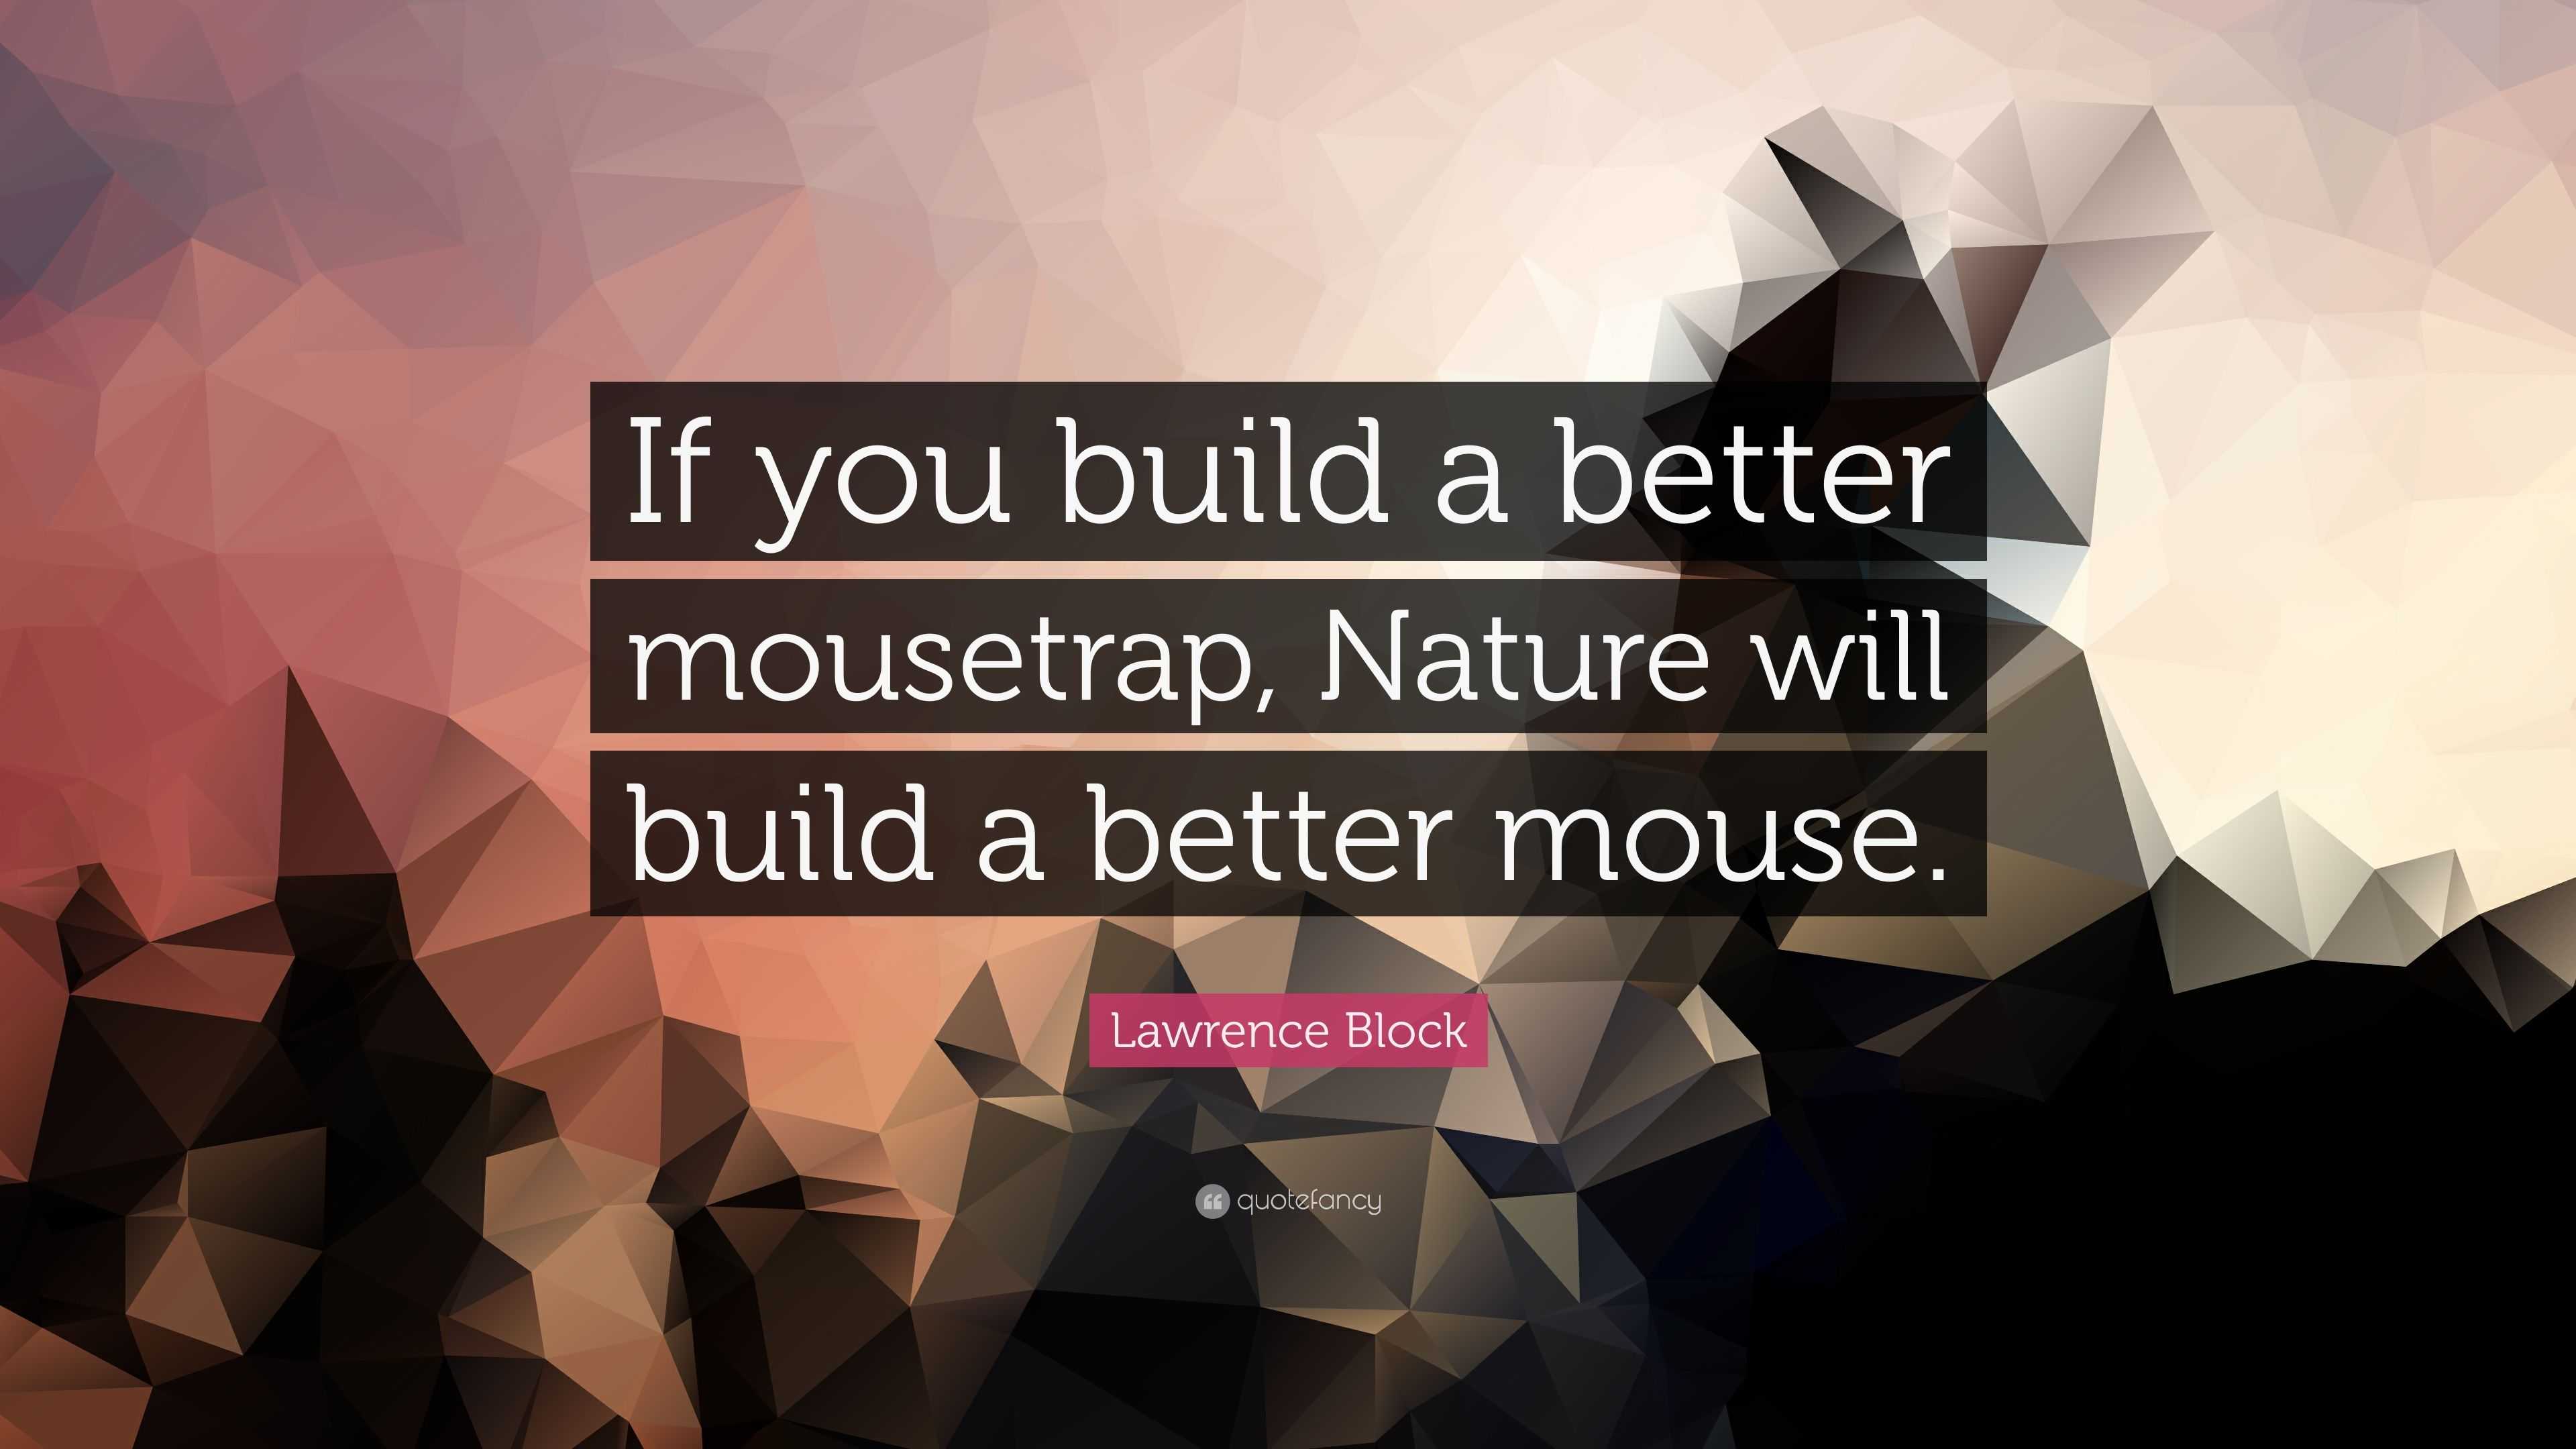 Do you need a better mousetrap ?